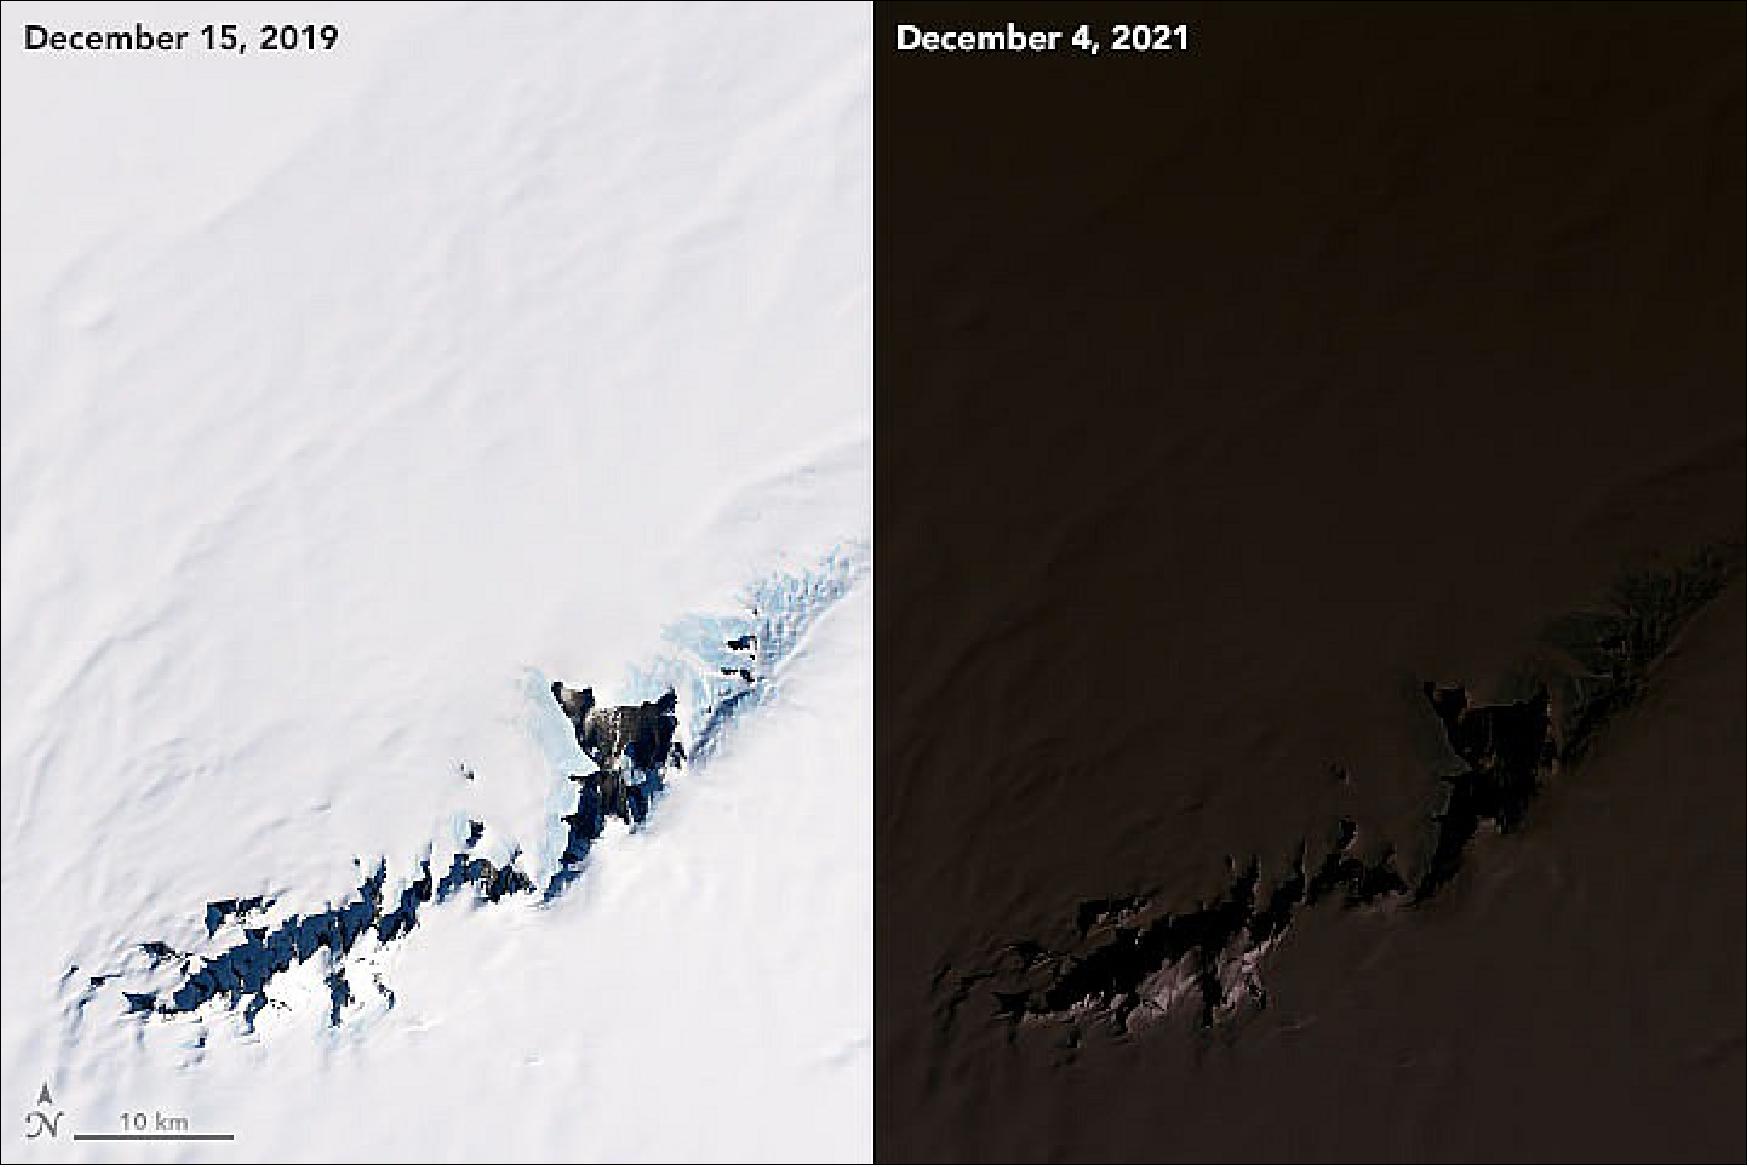 Figure 9: These natural-color images were acquired by the Operational Land Imager (OLI) on the Landsat-8 satellite on December 15, 2019, and December 4, 2021, respectively. Both images show the Pensacola Mountains, south of the Ronne Ice Shelf in Antarctica. The December 2021 image was acquired at 07:37 UTC, a few minutes before the eclipse reached totality. Note the slight difference in the amount of darkness from south to north, as the south-facing slopes received some faint sunlight from the horizon (image credit: NASA Earth Observatory)